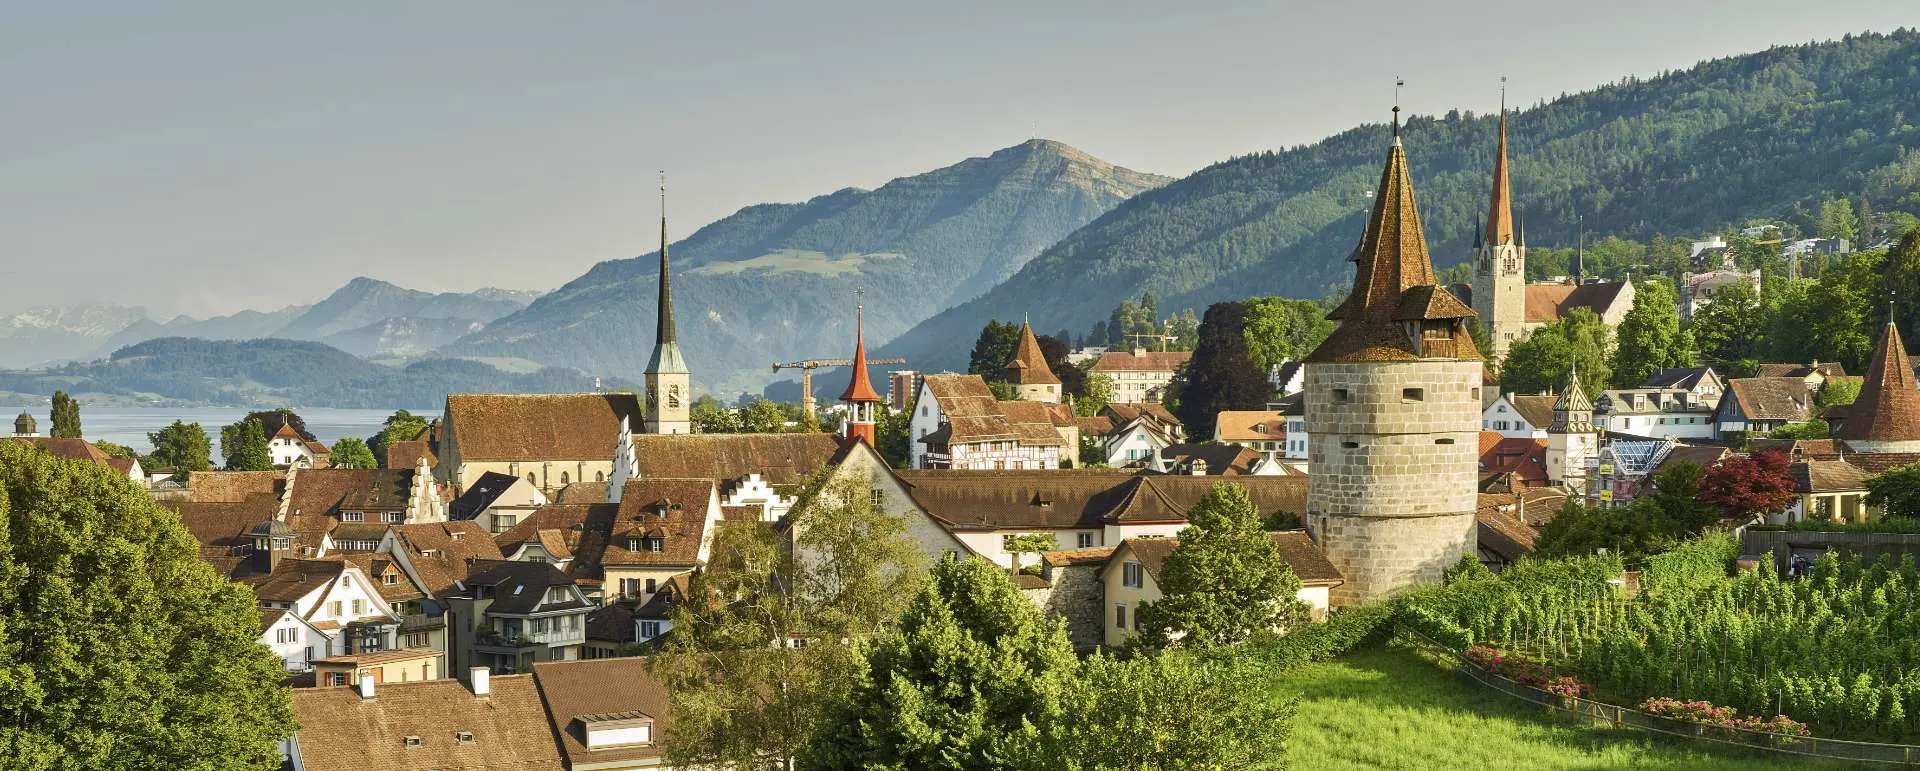 Zug - the destination for group hotel for theater groups